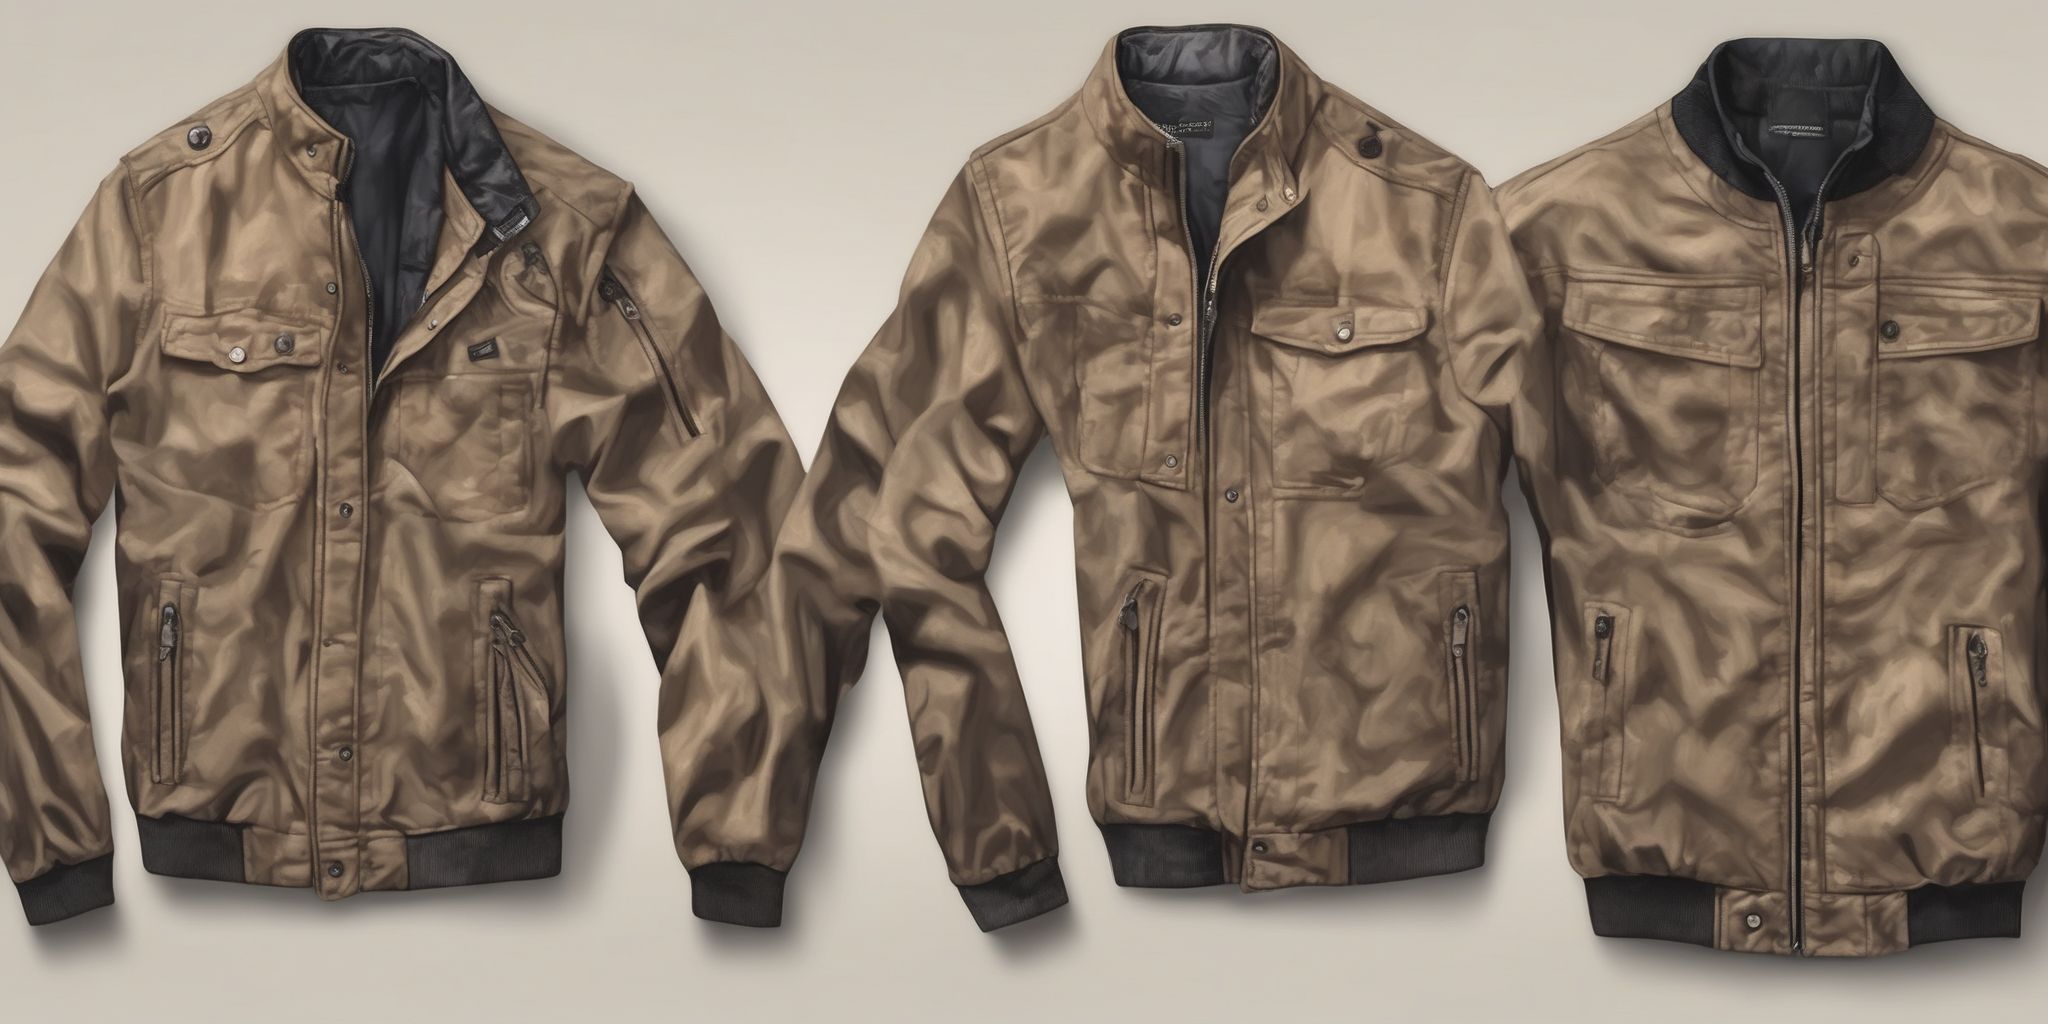 Jacket  in realistic, photographic style